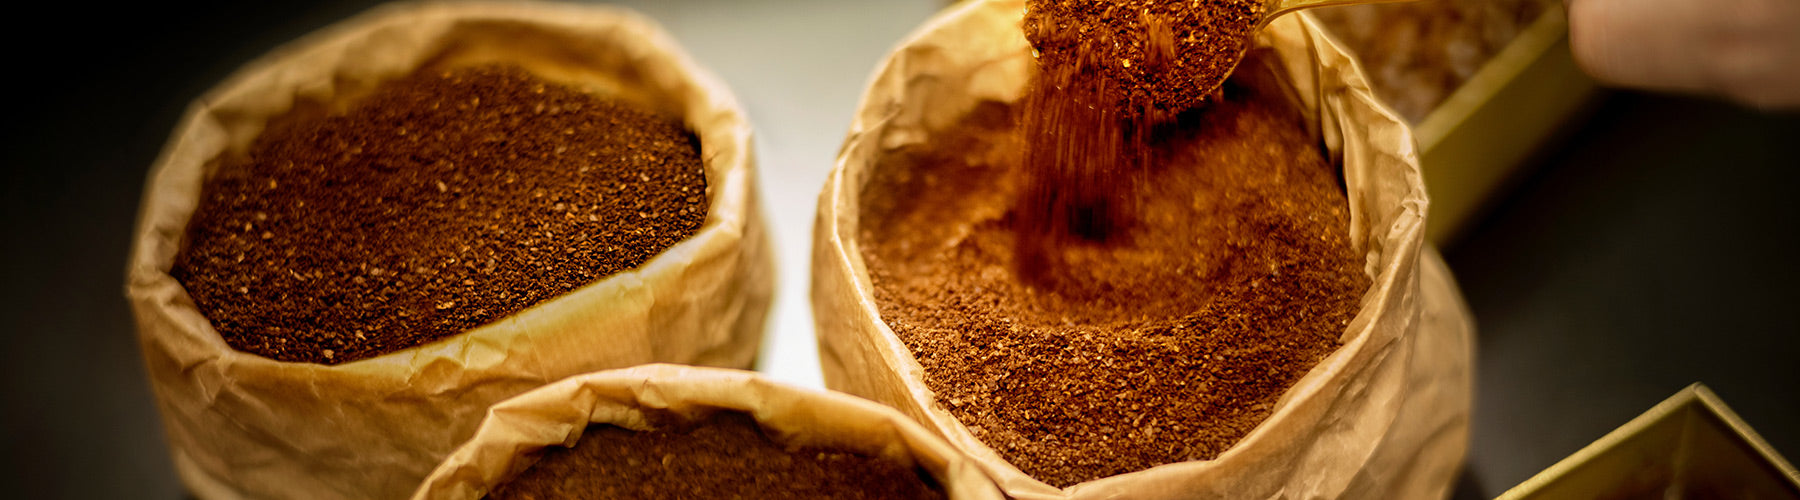 5 Interesting Facts About Coffee